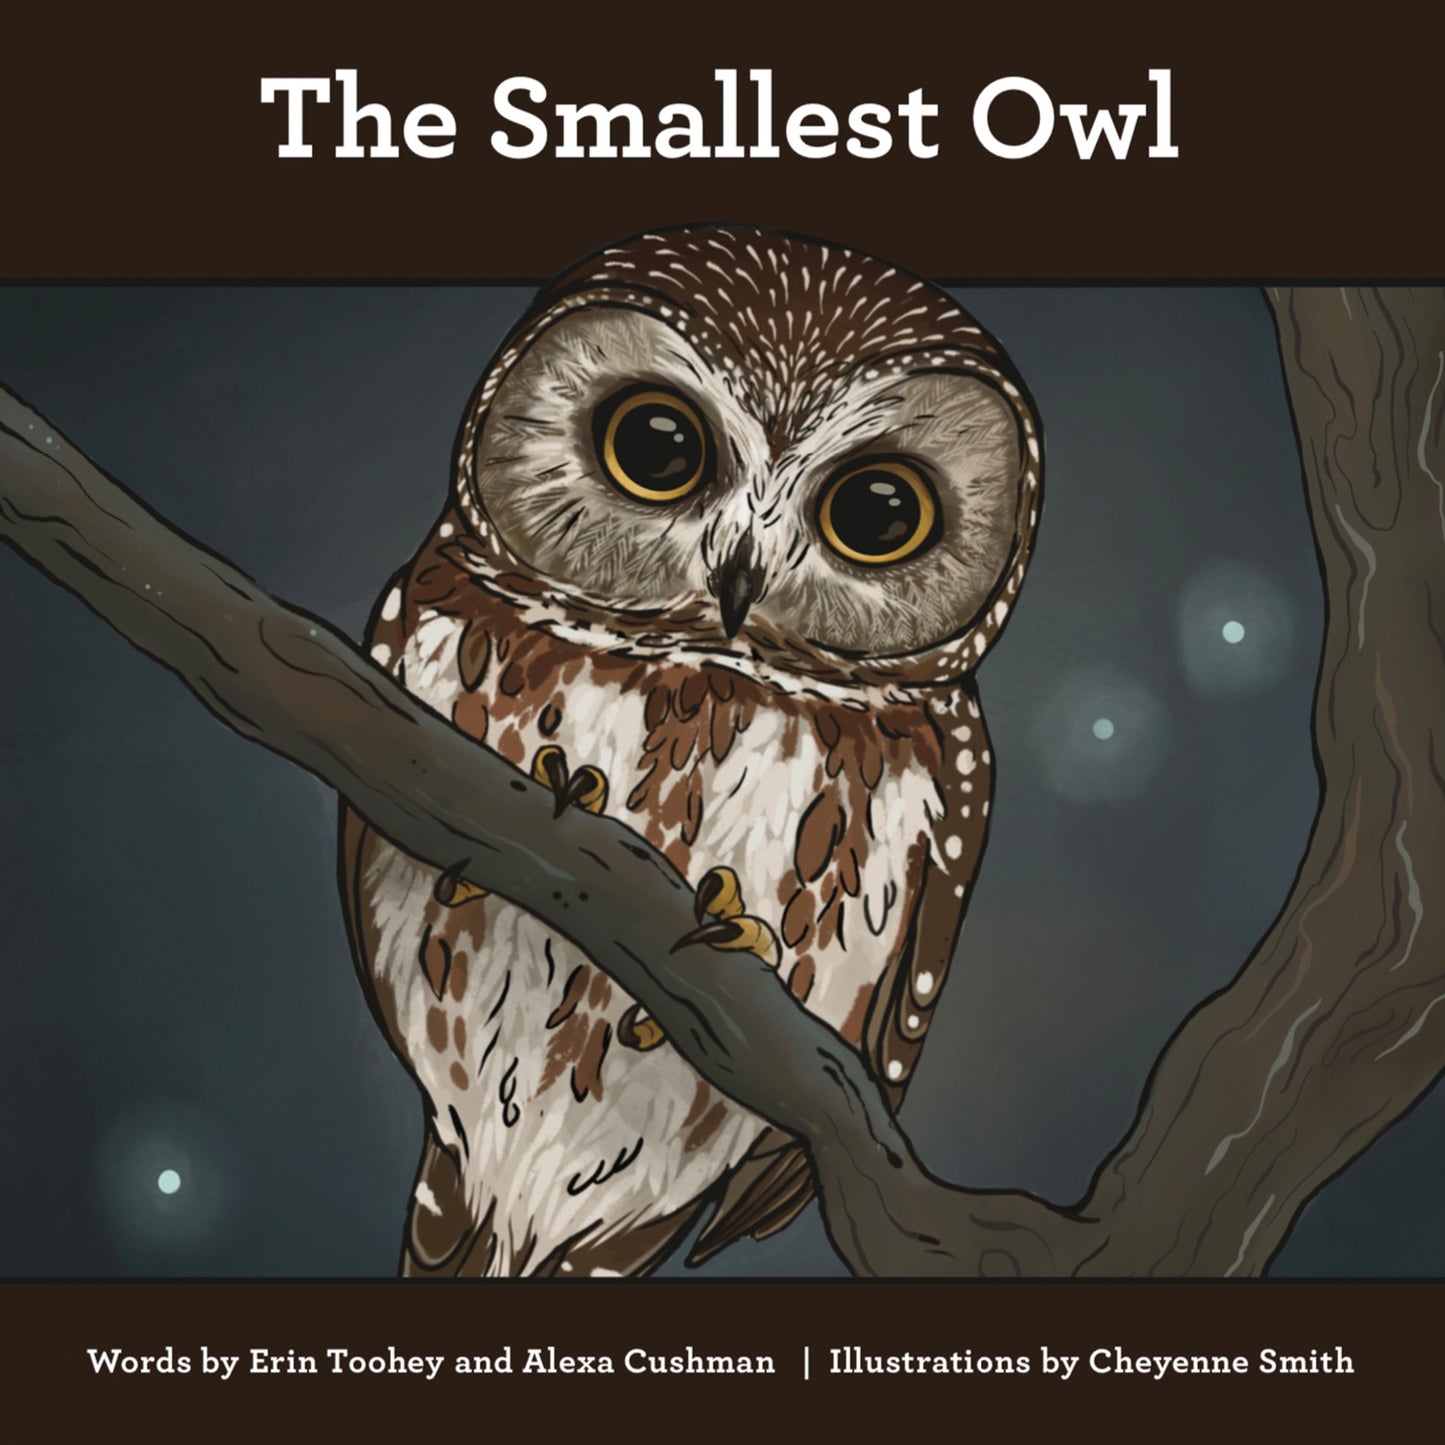 The Smallest Owl